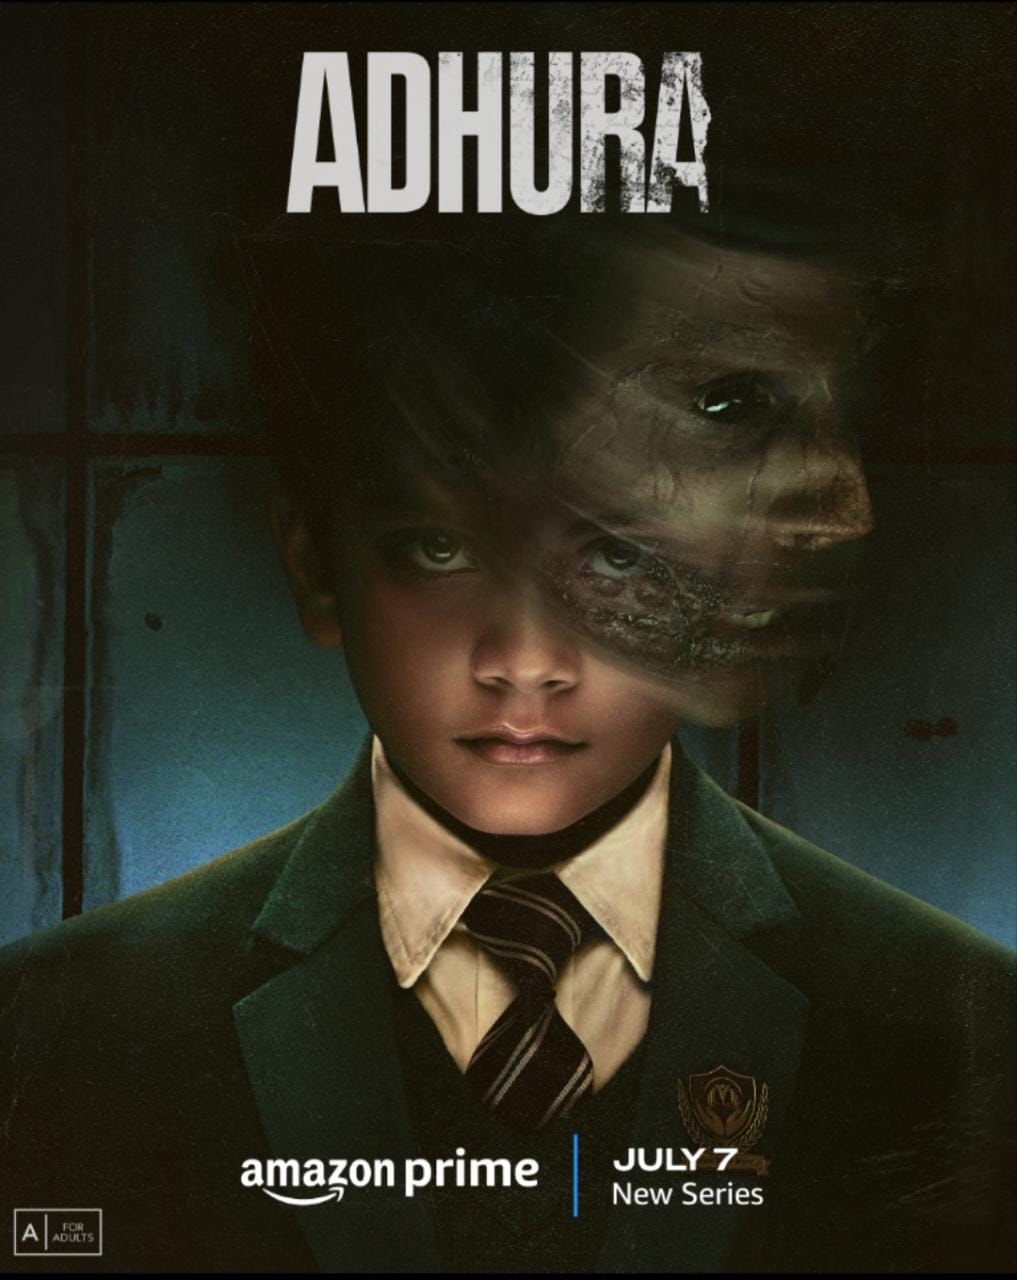 Prime Video announces its first Hindi horror series ‘Adhura’ to have its global premiere on 7th July!